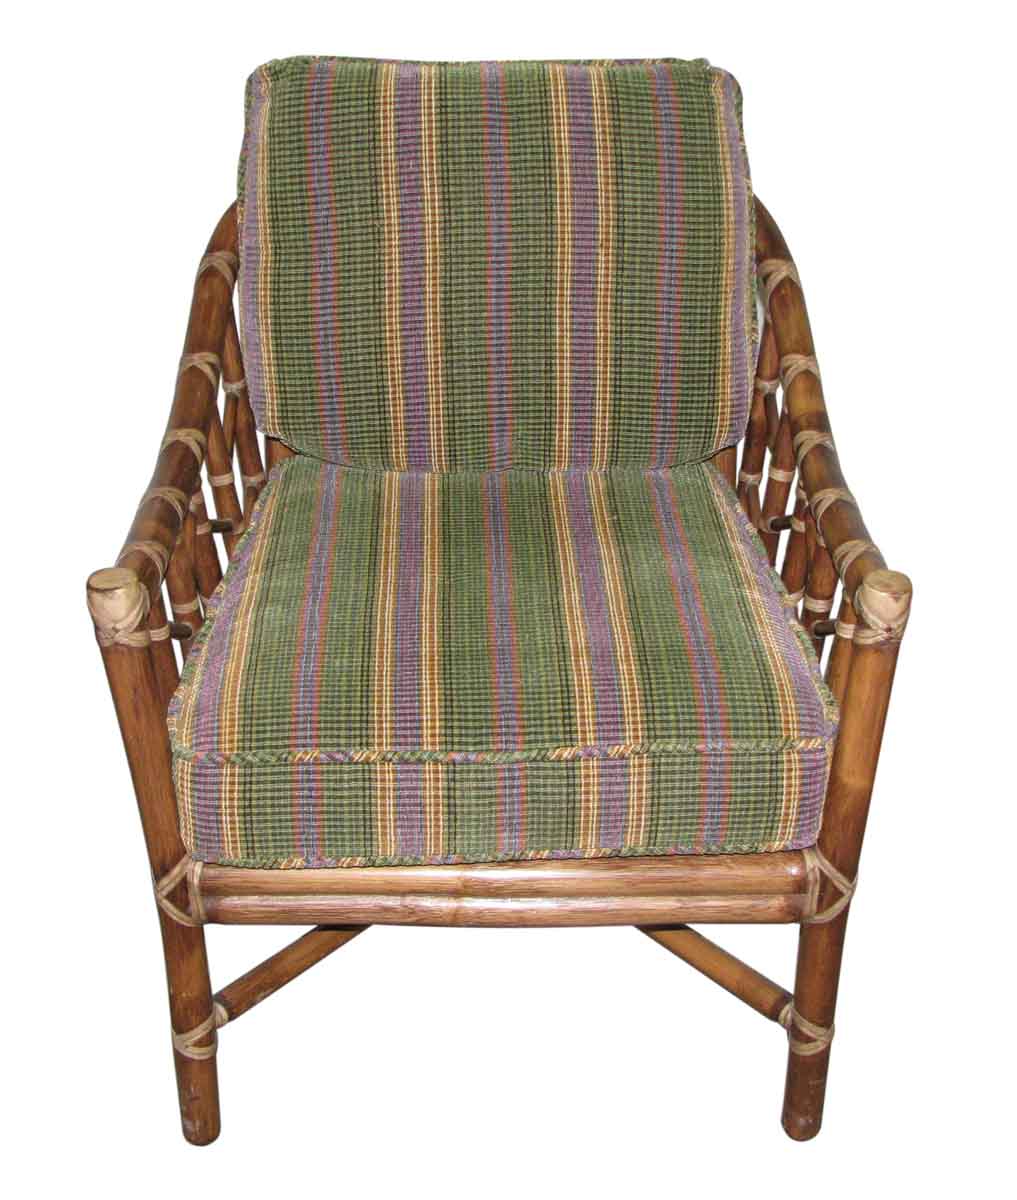 Bamboo Patio Chair | Olde Good Things